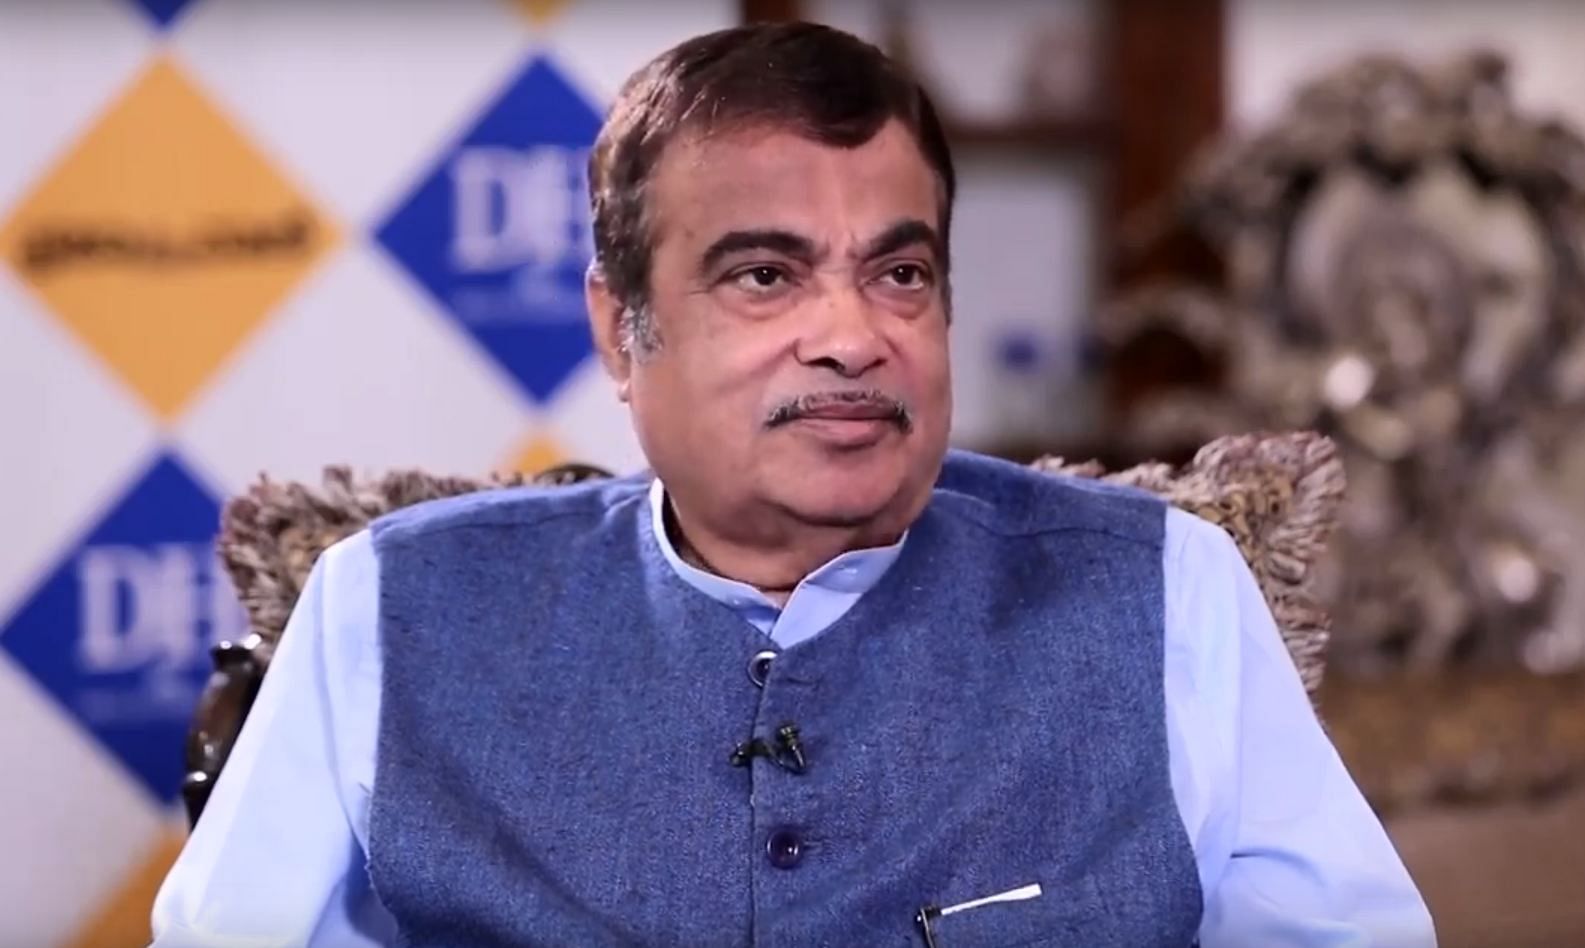 Union Minister for Road Transport & Highways, Shipping and Water Resources, River Development & Ganga Rejuvenation Nitin Gadkari.